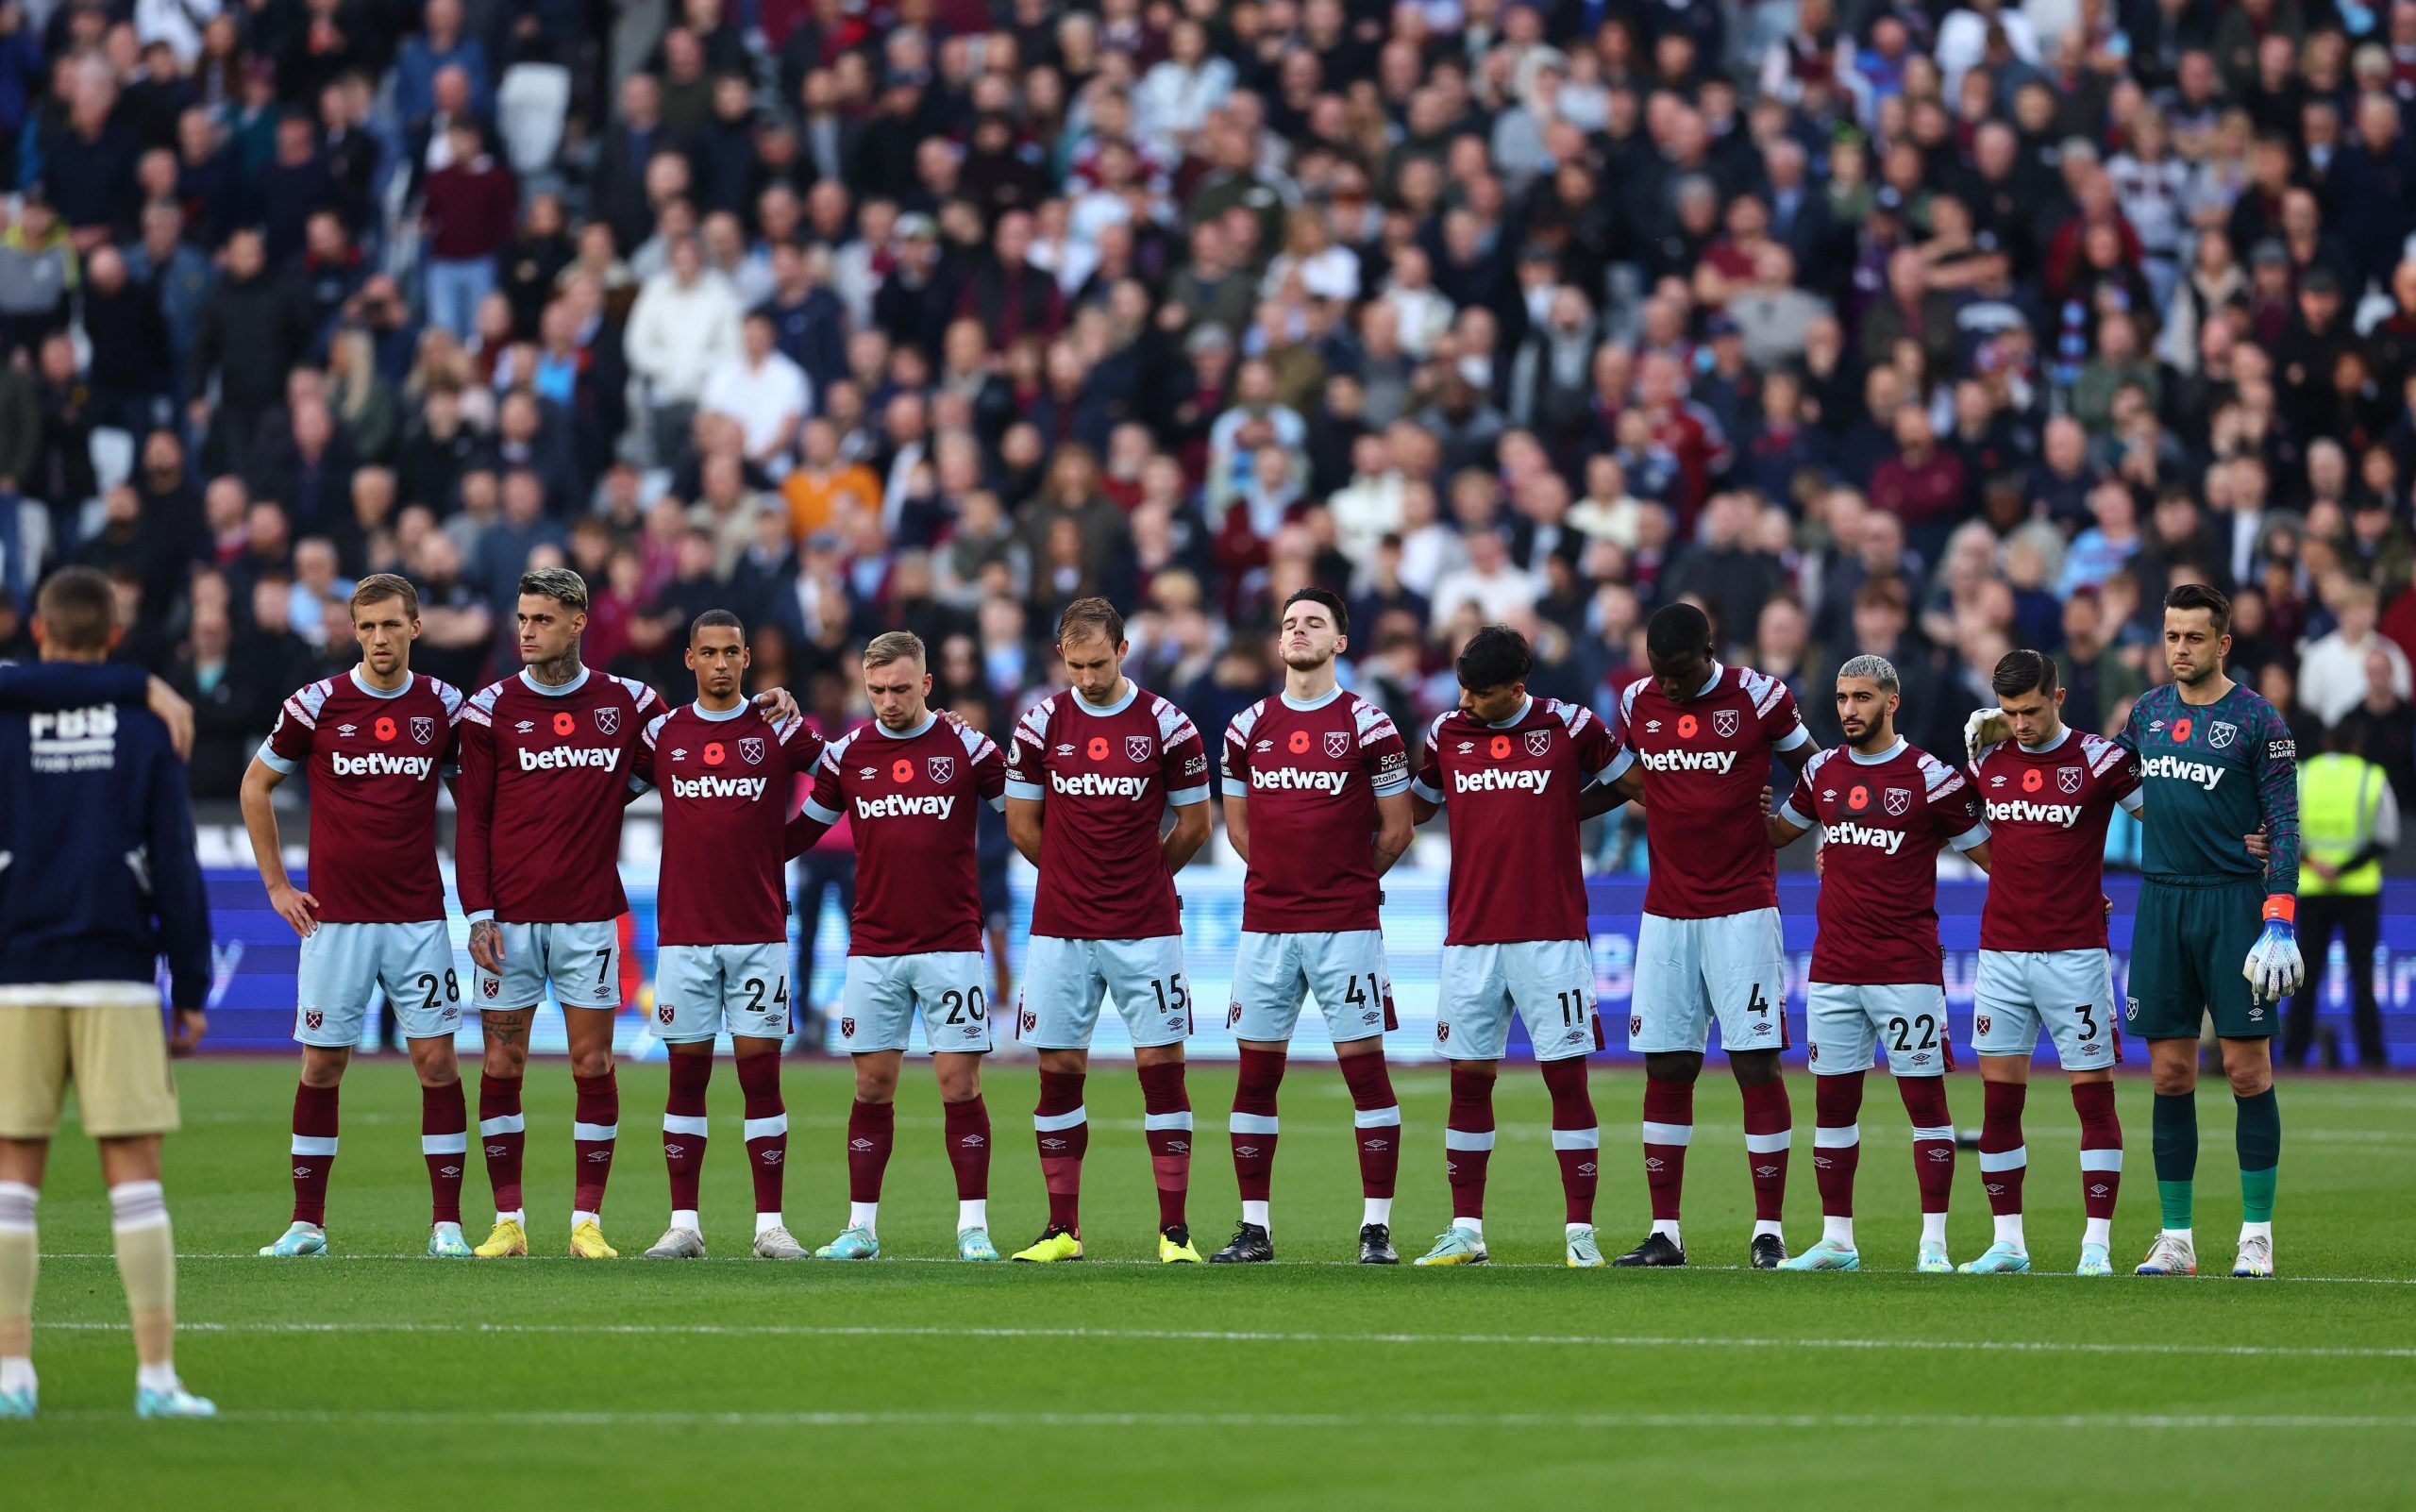 Soccer Football - Premier League - West Ham United v Leicester City - London Stadium, London, Britain - November 12, 2022  West Ham United's players during a minutes silence as part of remembrance commemorations before the match REUTERS/David Klein EDITORIAL USE ONLY. No use with unauthorized audio, video, data, fixture lists, club/league logos or 'live' services. Online in-match use limited to 75 images, no video emulation. No use in betting, games or single club /league/player publications.  P